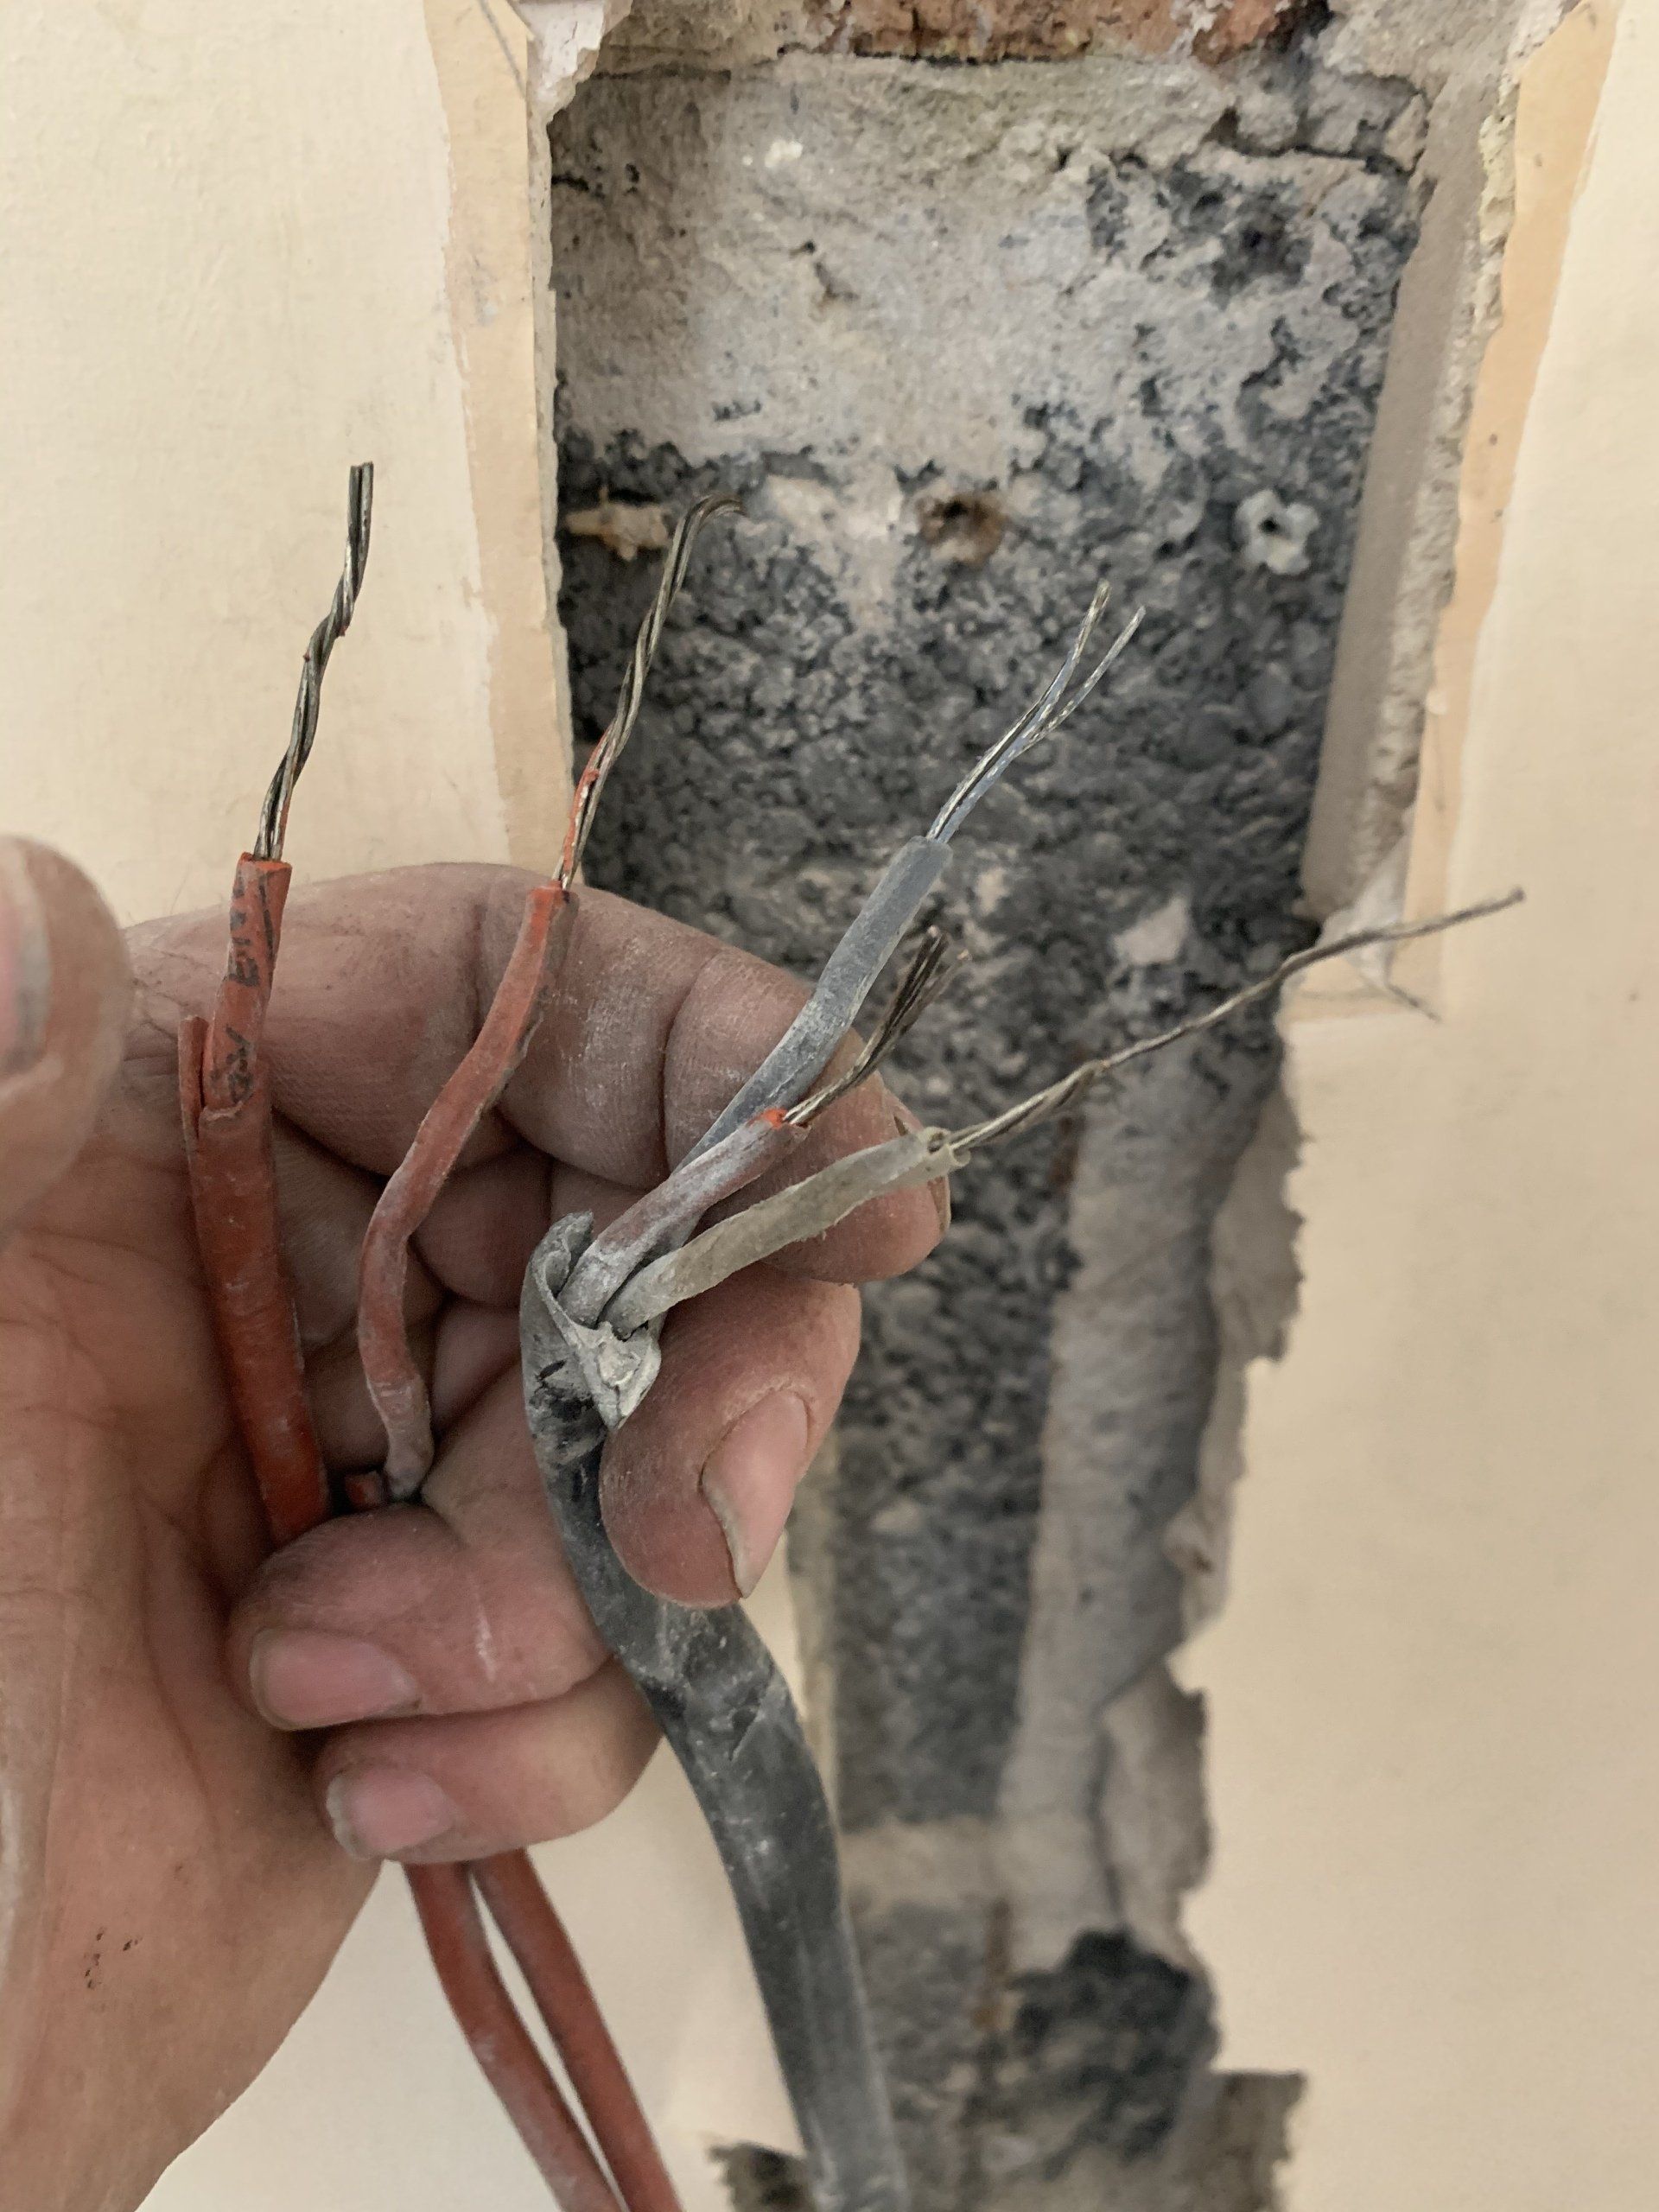 Emergency electricians near me, domestic electricians near me,residential electrician near me.recommended electricians, Full house Rewire warrington   carried out by Electrician4you in newton le willows